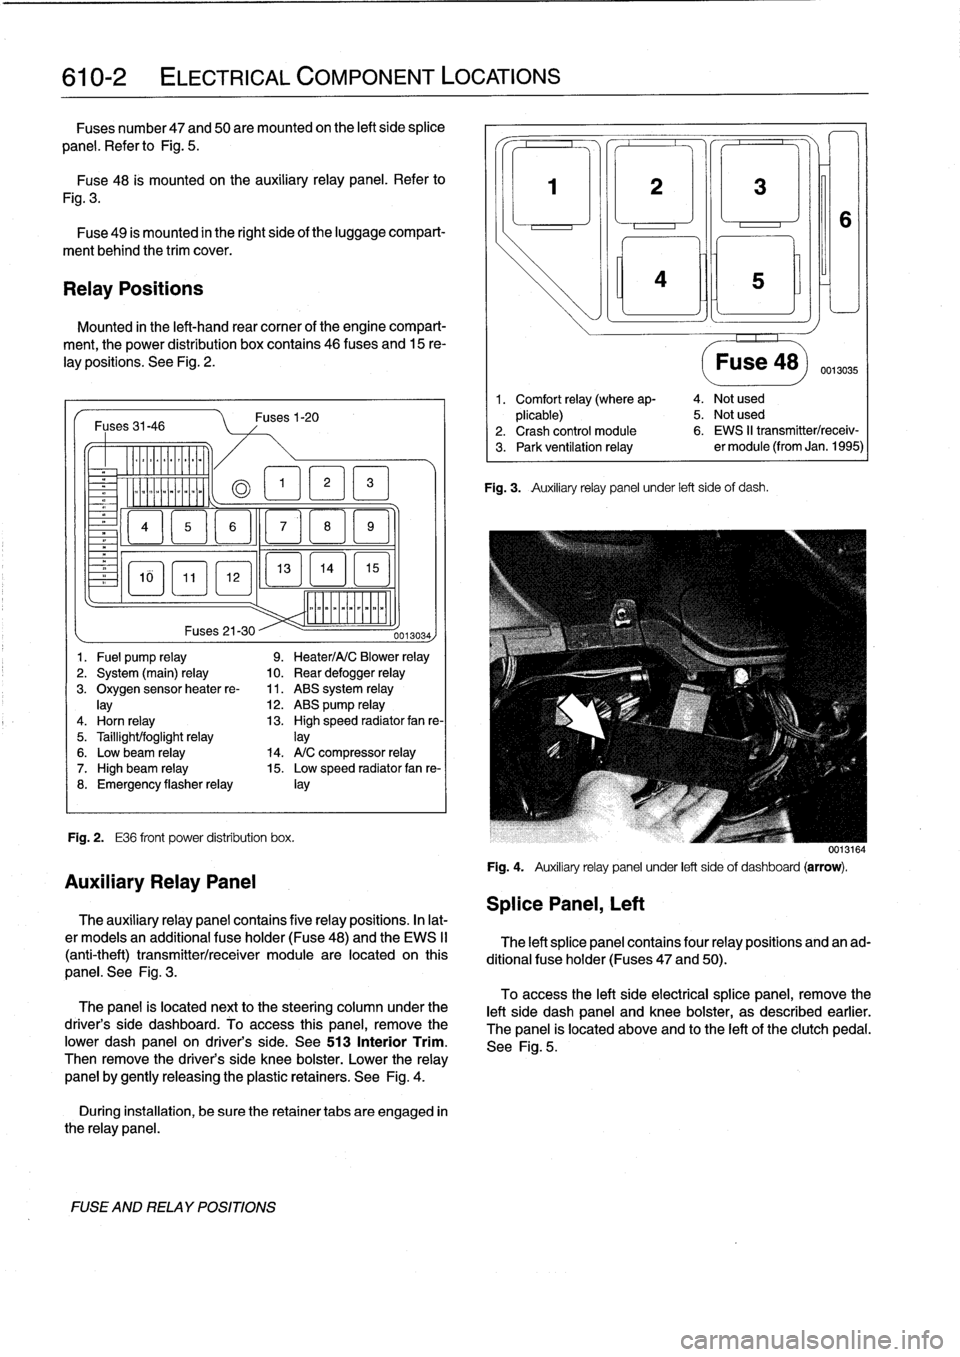 BMW M3 1996 E36 Workshop Manual 
610-2

	

ELECTRICAL
COMPONENT
LOCATIONS

Fuses
number47
and
50are
mounted
on
the
left
side
splice

panel
.
Refer
lo
Fig
.
5
.

Fuse48
is
mounted
on
the
auxiliary
relay
panel
.
Refer
to

Fig
.
3
.

F